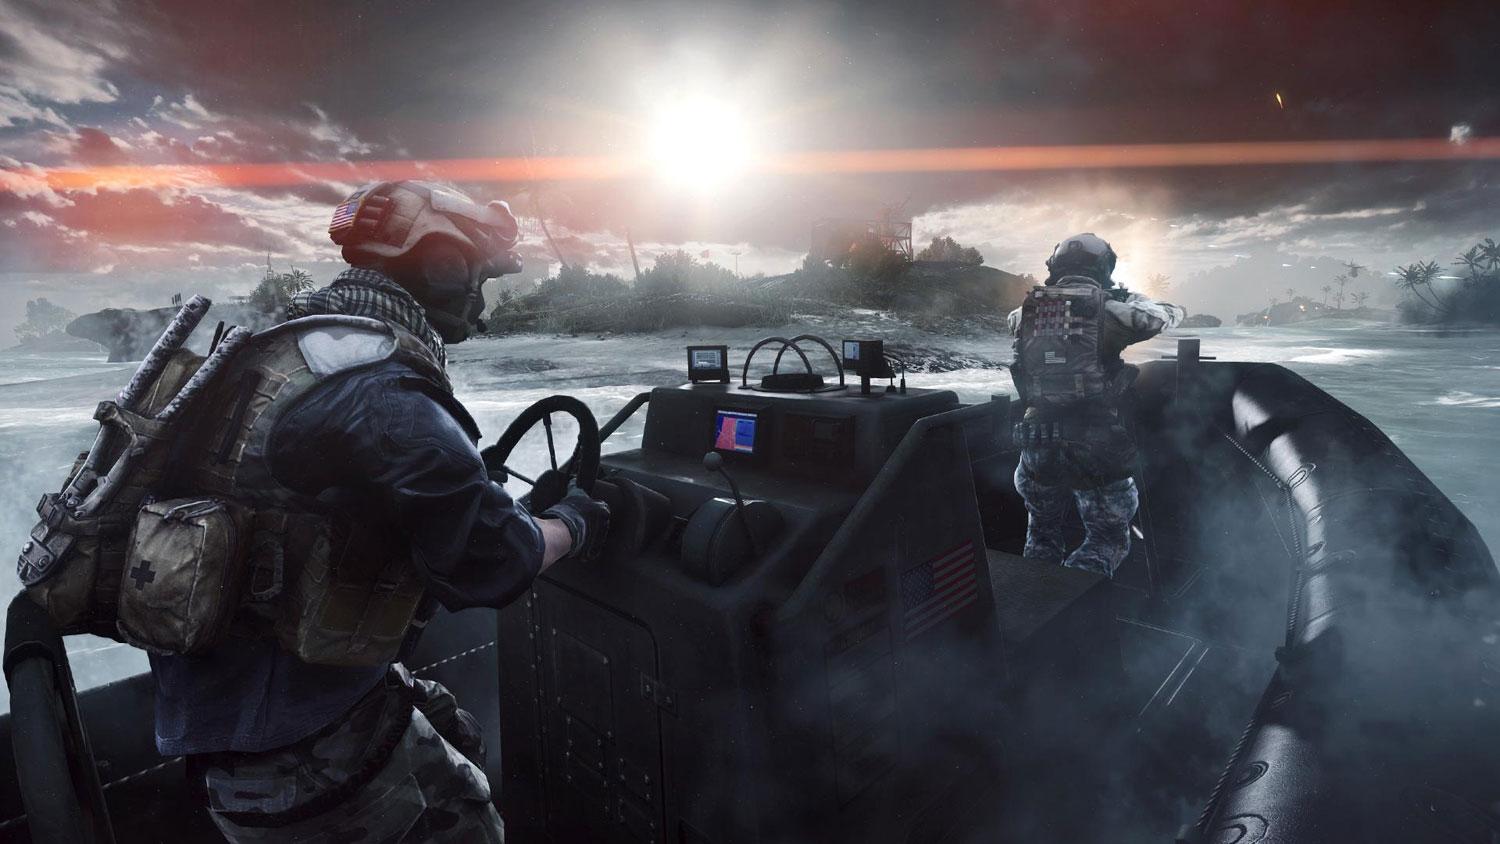 Battlefield 4 server troubles are both cause for celebration and